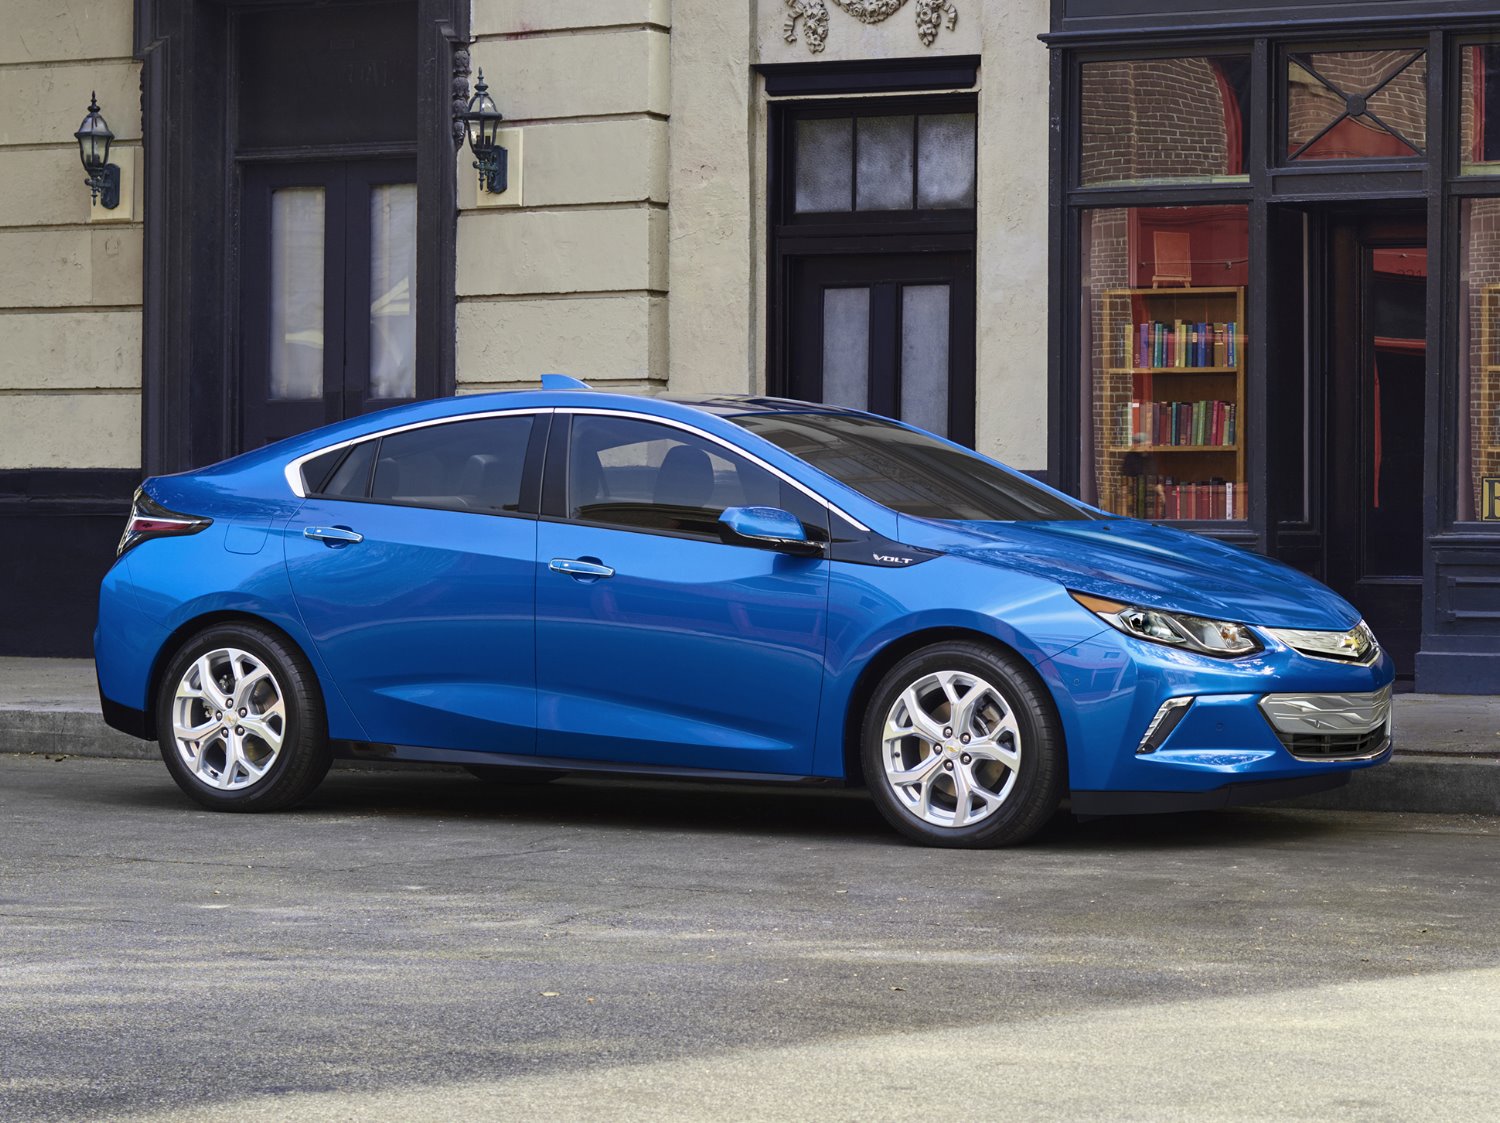 Chevy Volt to be no more